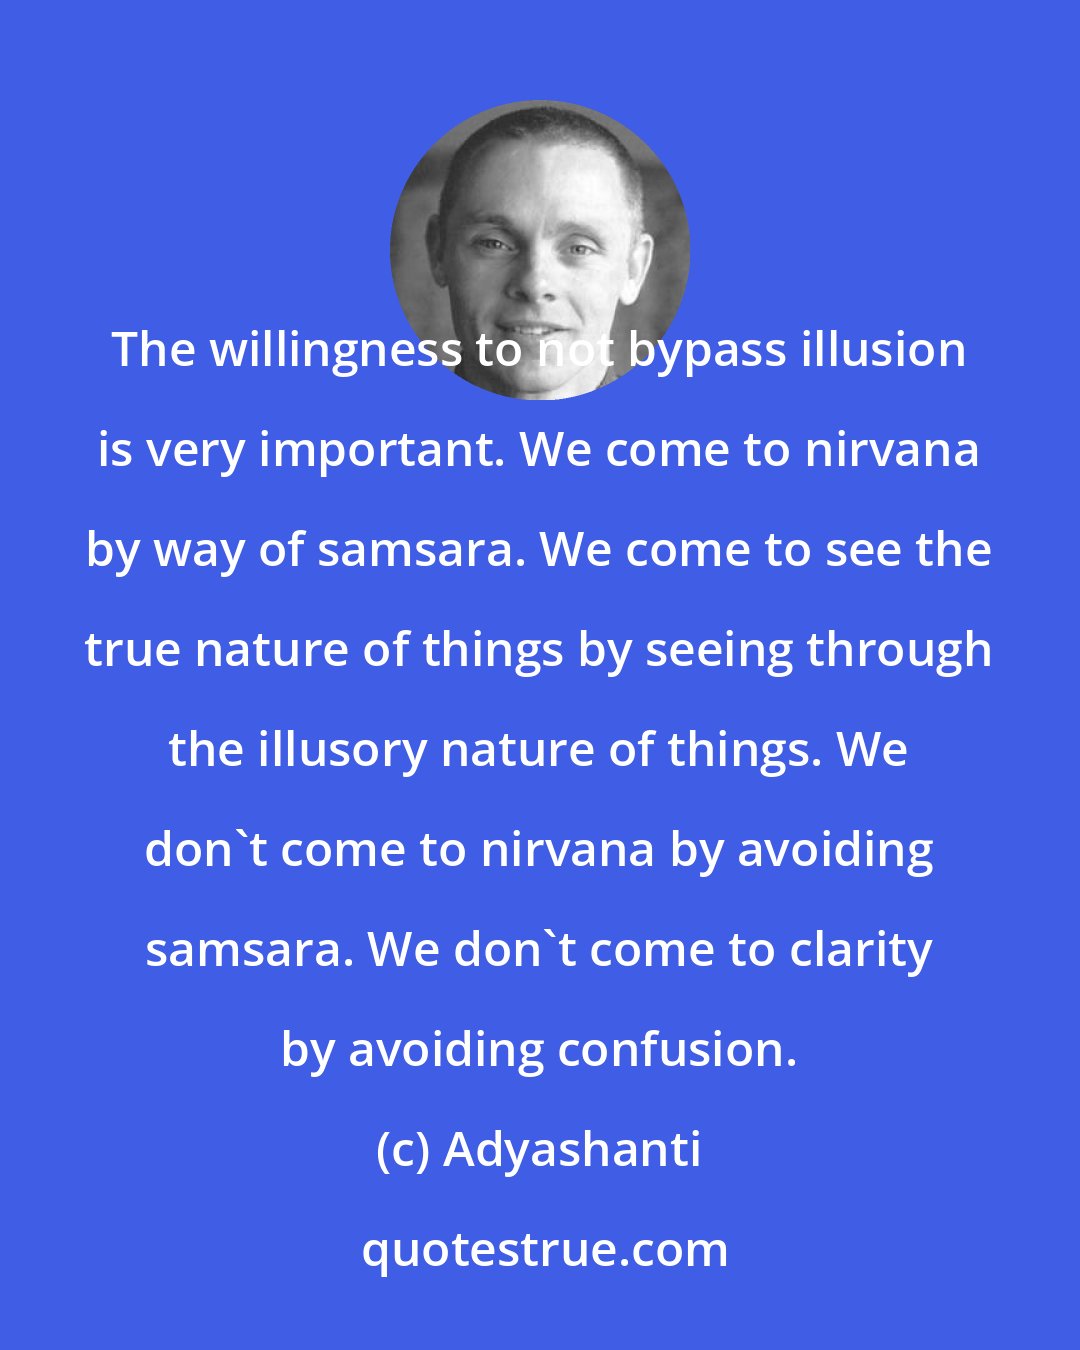 Adyashanti: The willingness to not bypass illusion is very important. We come to nirvana by way of samsara. We come to see the true nature of things by seeing through the illusory nature of things. We don't come to nirvana by avoiding samsara. We don't come to clarity by avoiding confusion.